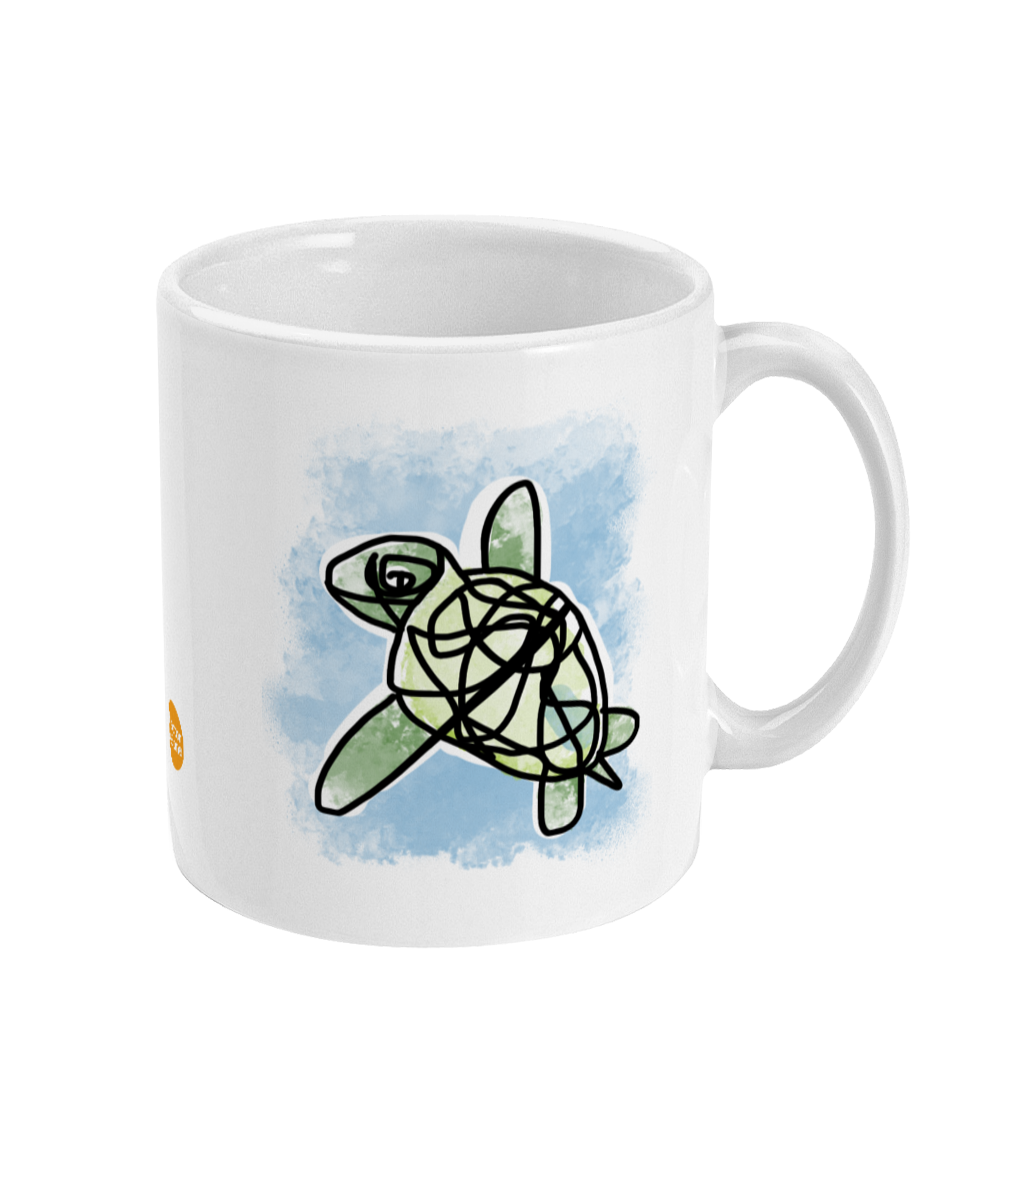 Myrtle the green Sea Turtle illustrated ceramic coffee mug by Hector and Bone Right View